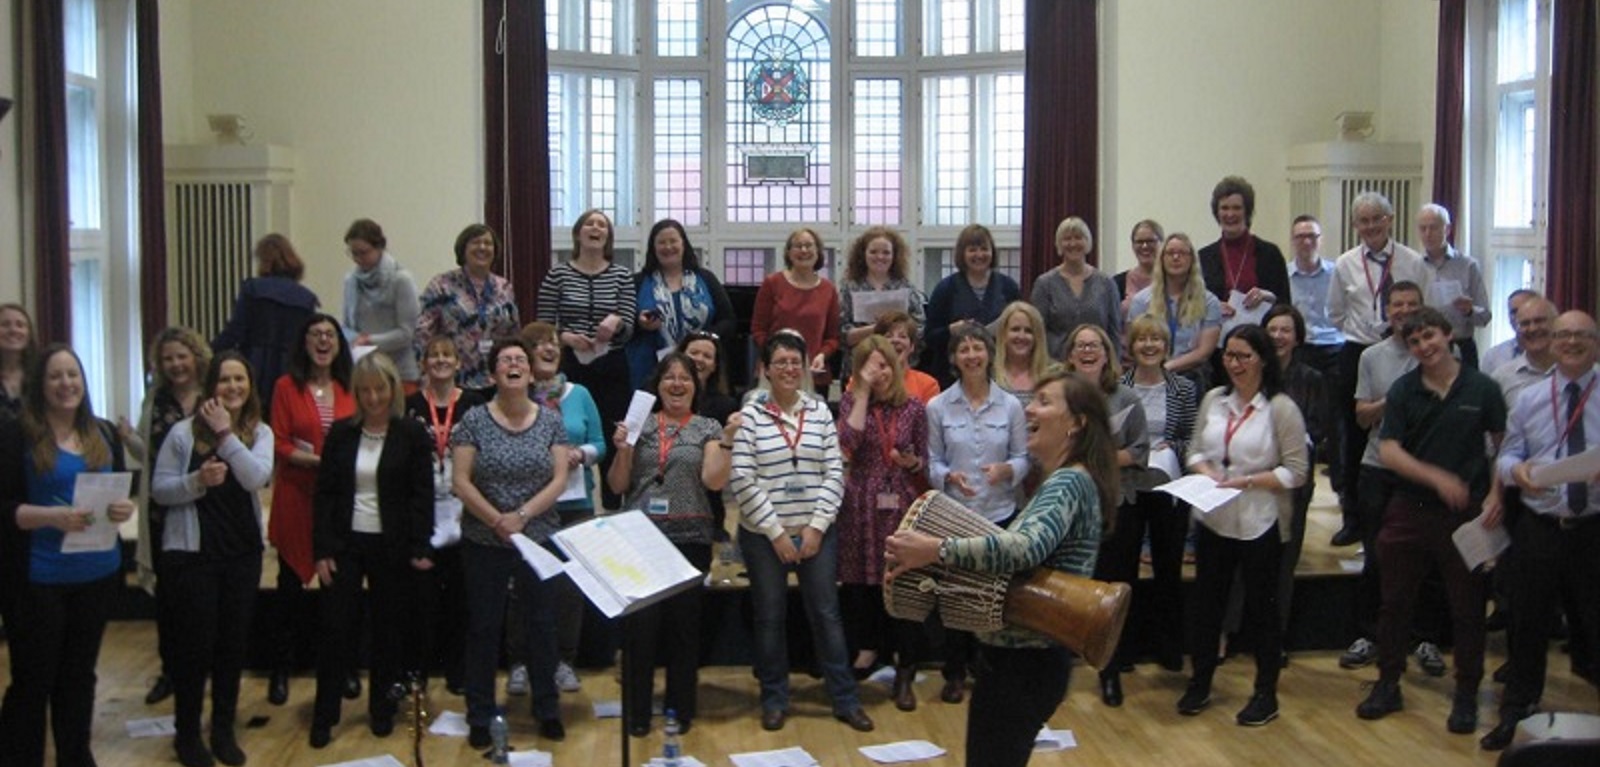 Queen's University Staff Wellbeing Choir practising and laughing in the Harty Room at Queen's